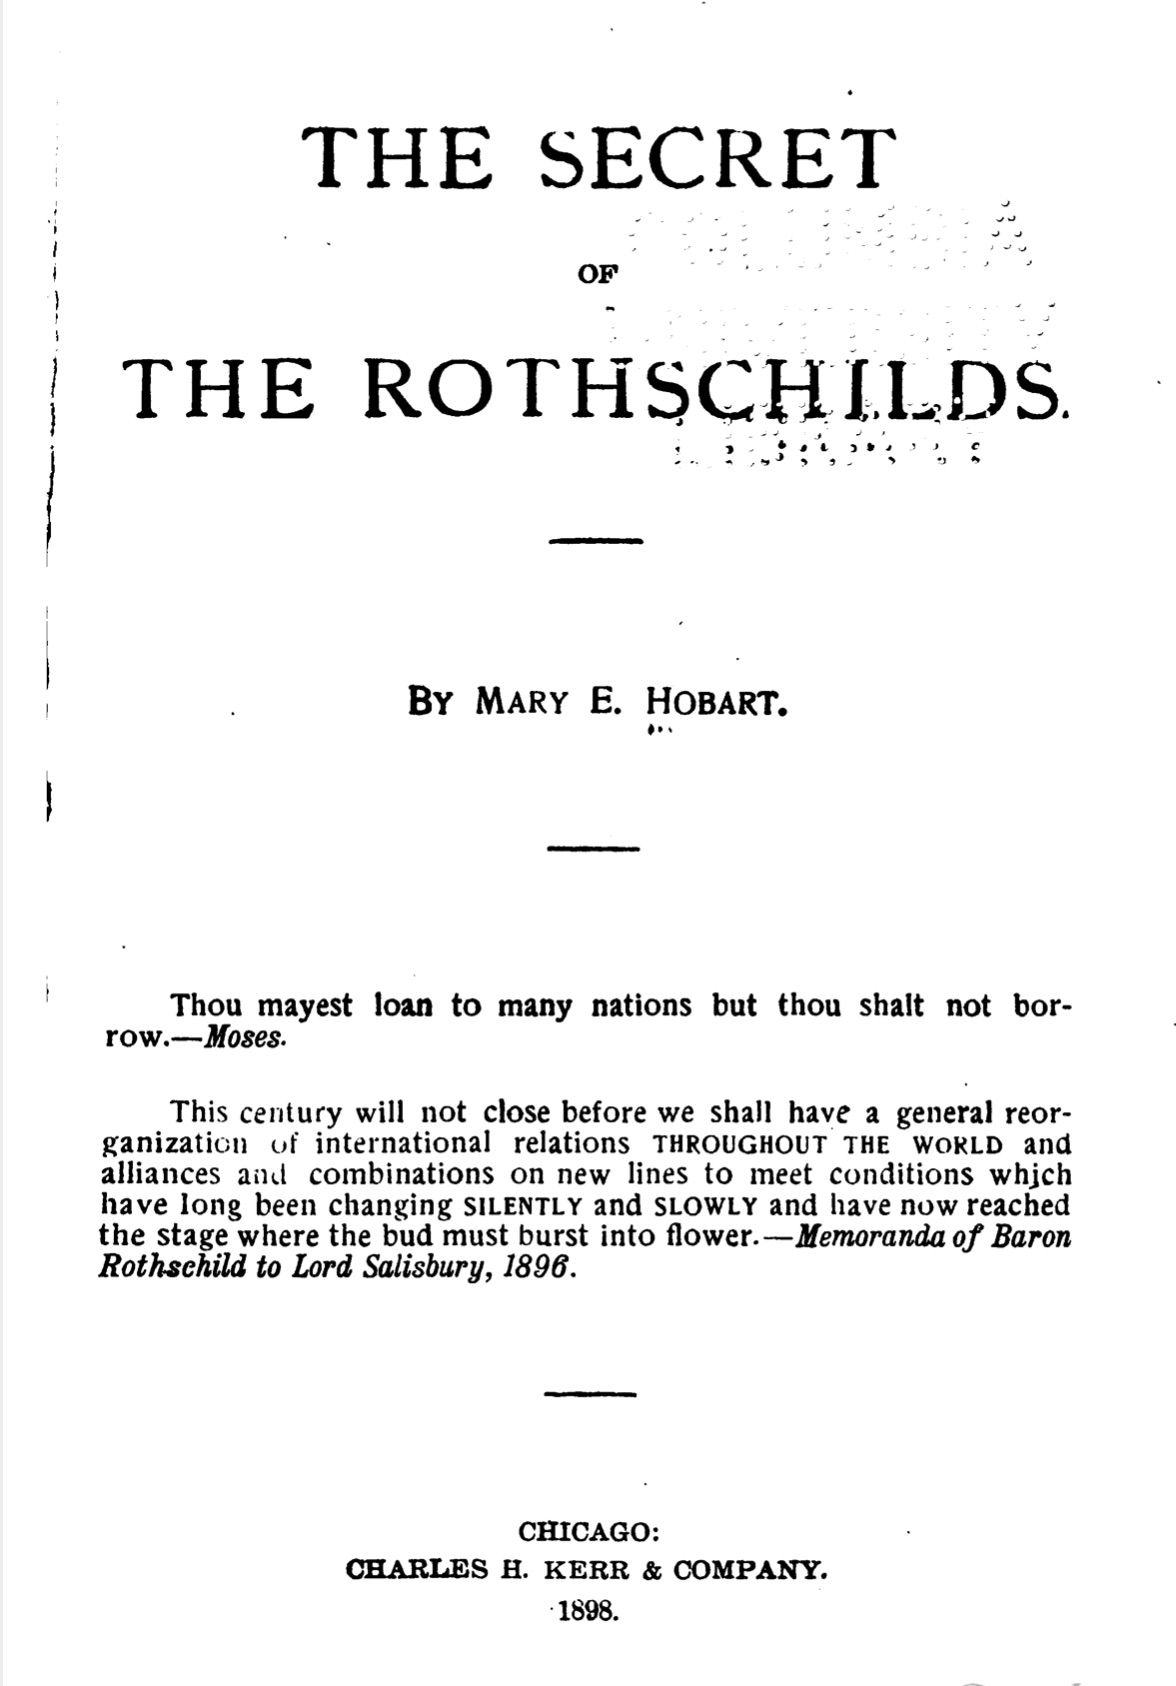 The Secret of the Rothschilds (1898) by Mary E. Hobart